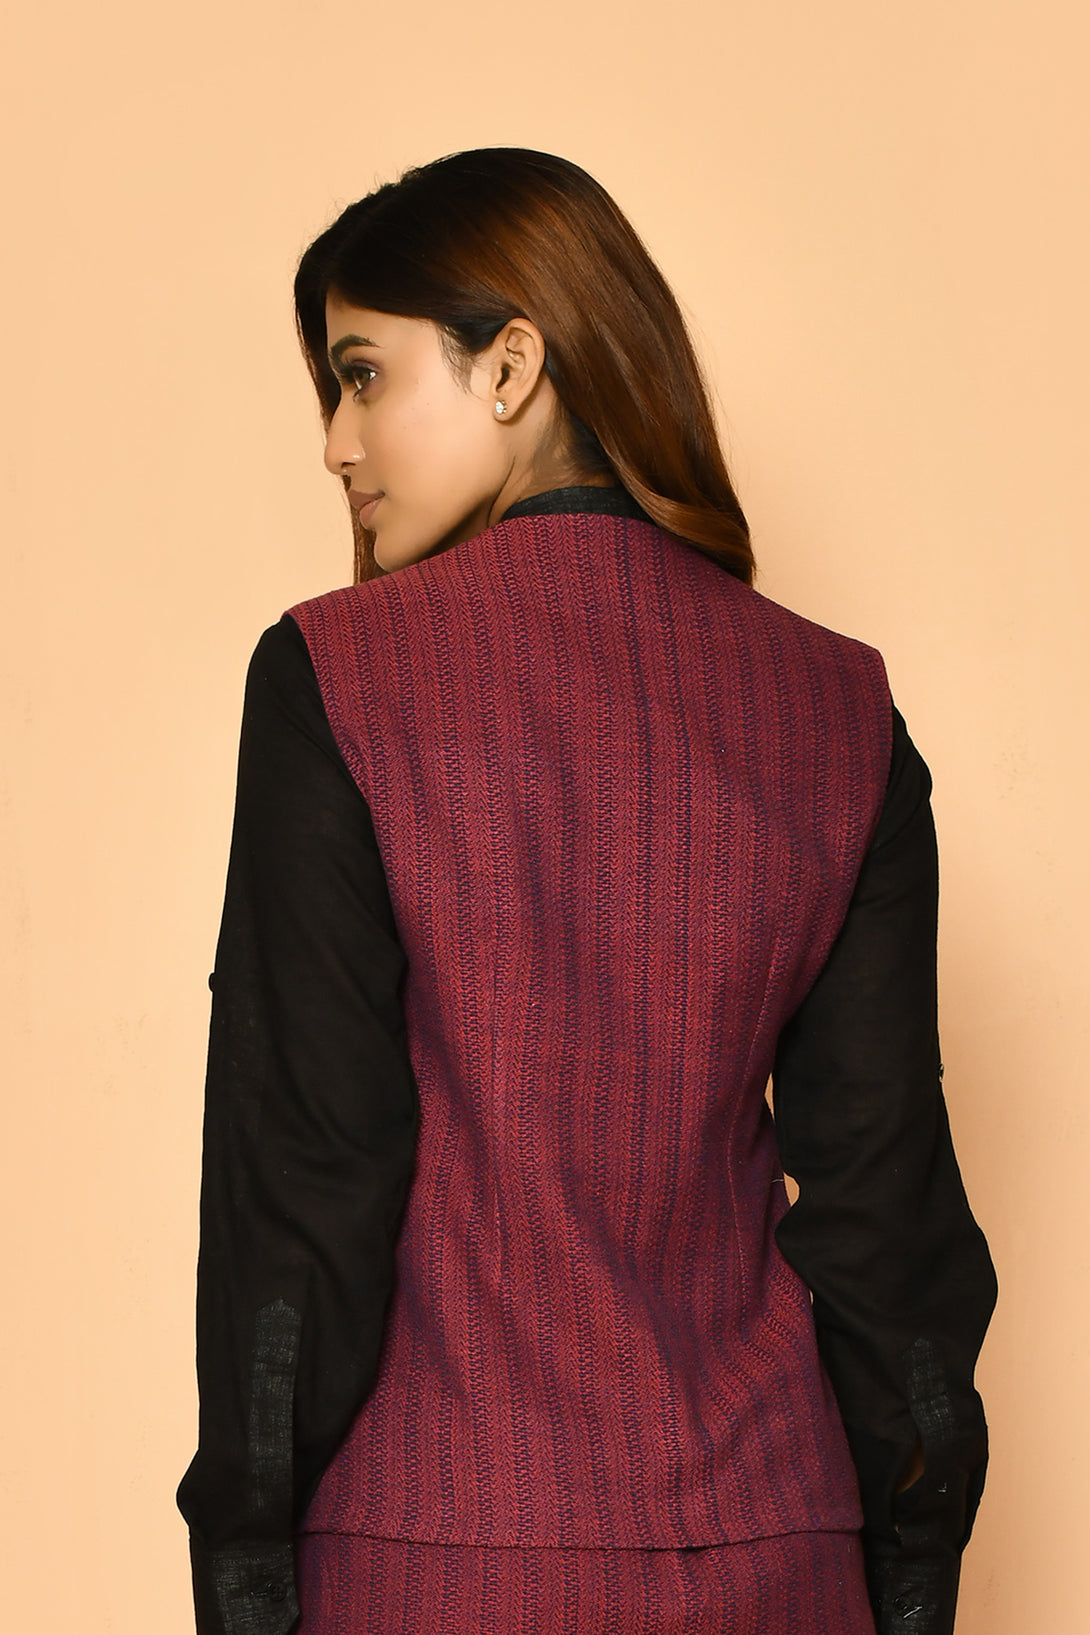 latest woman's handloom cotton jackets for summers